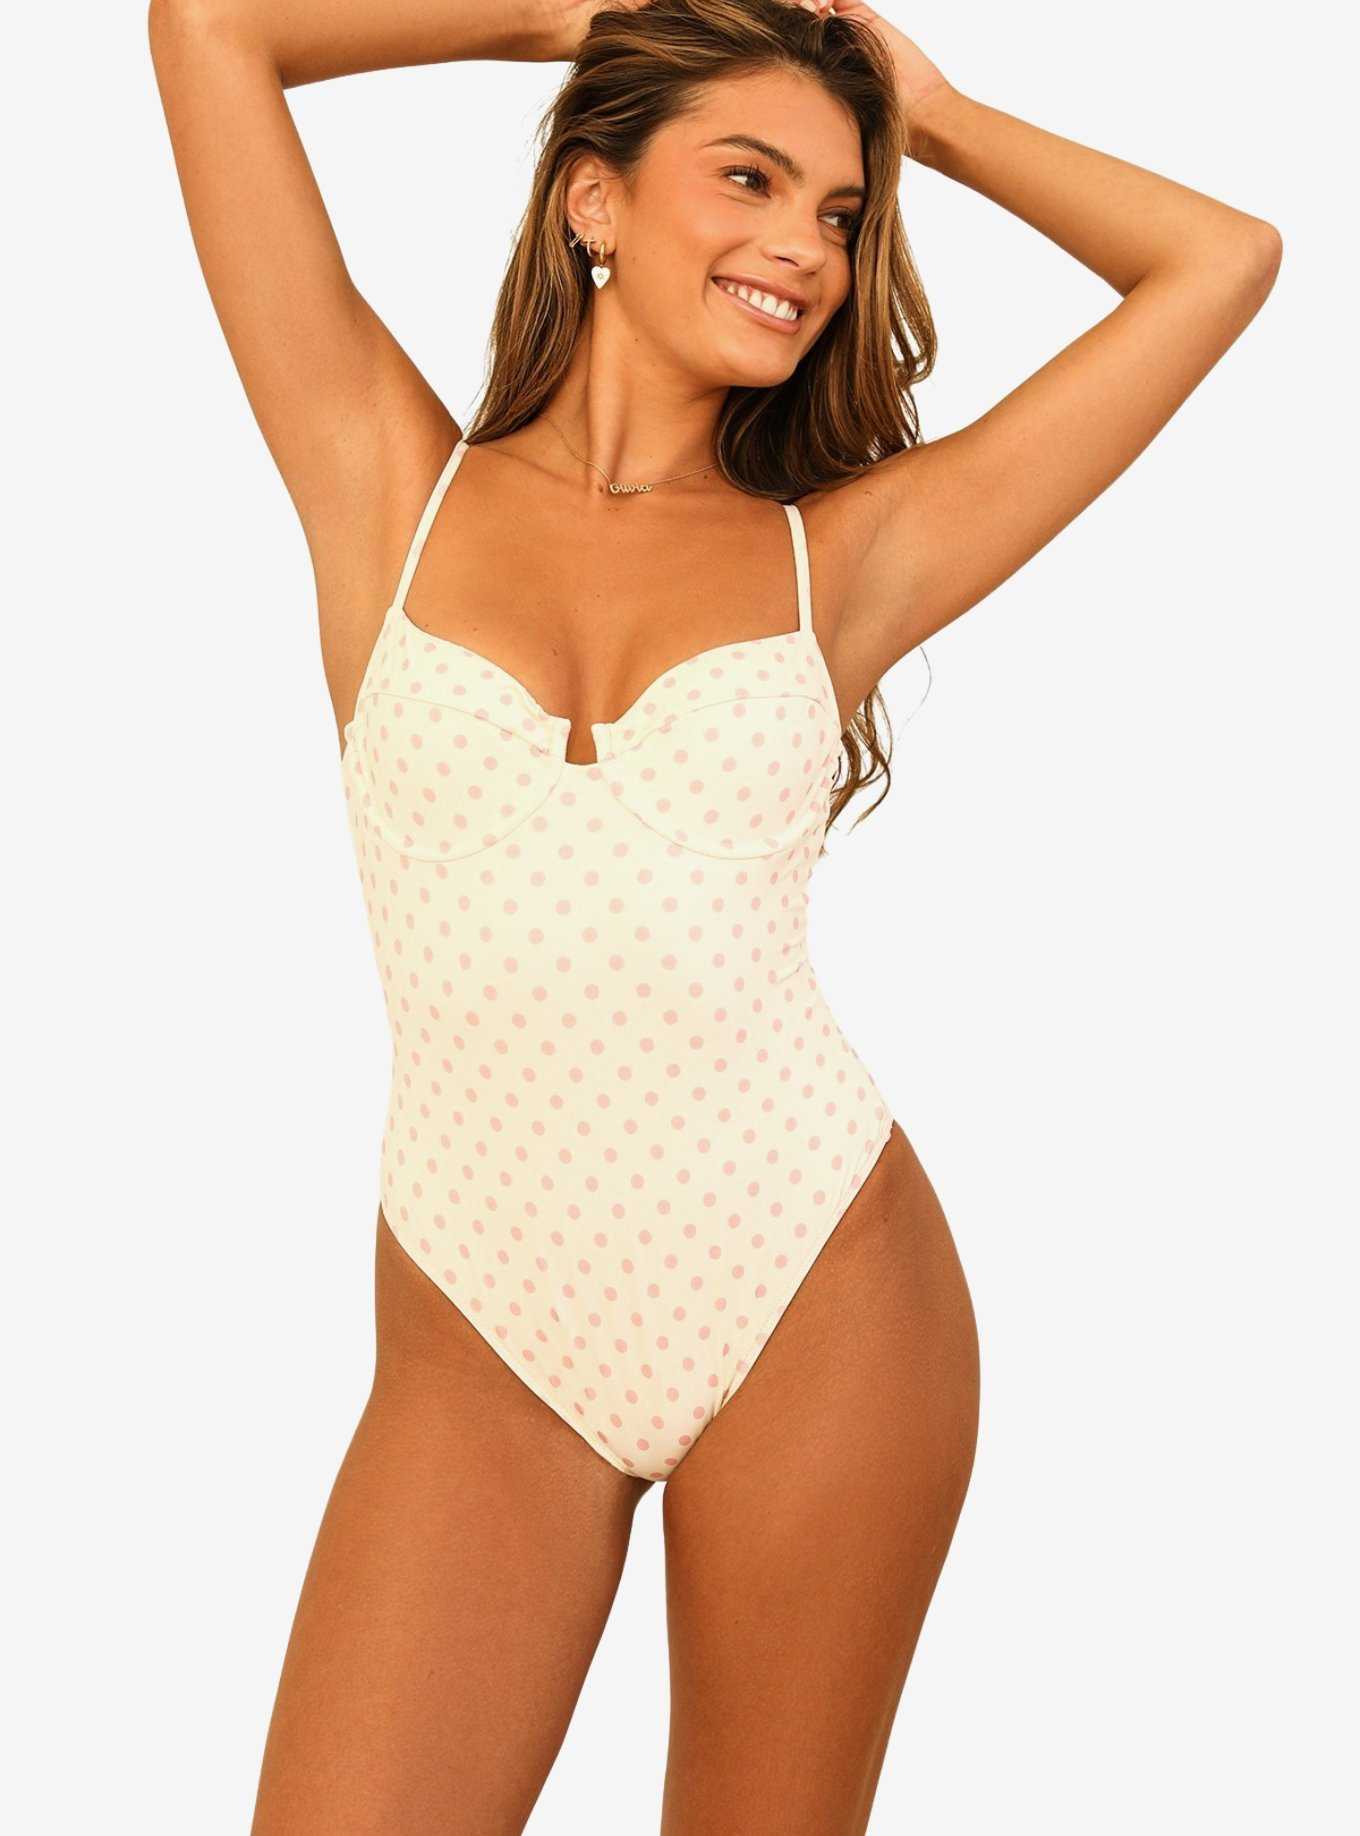 Dippin' Daisy's Saltwater Thigh High Cut Swim One Piece Dotted Pink, , hi-res